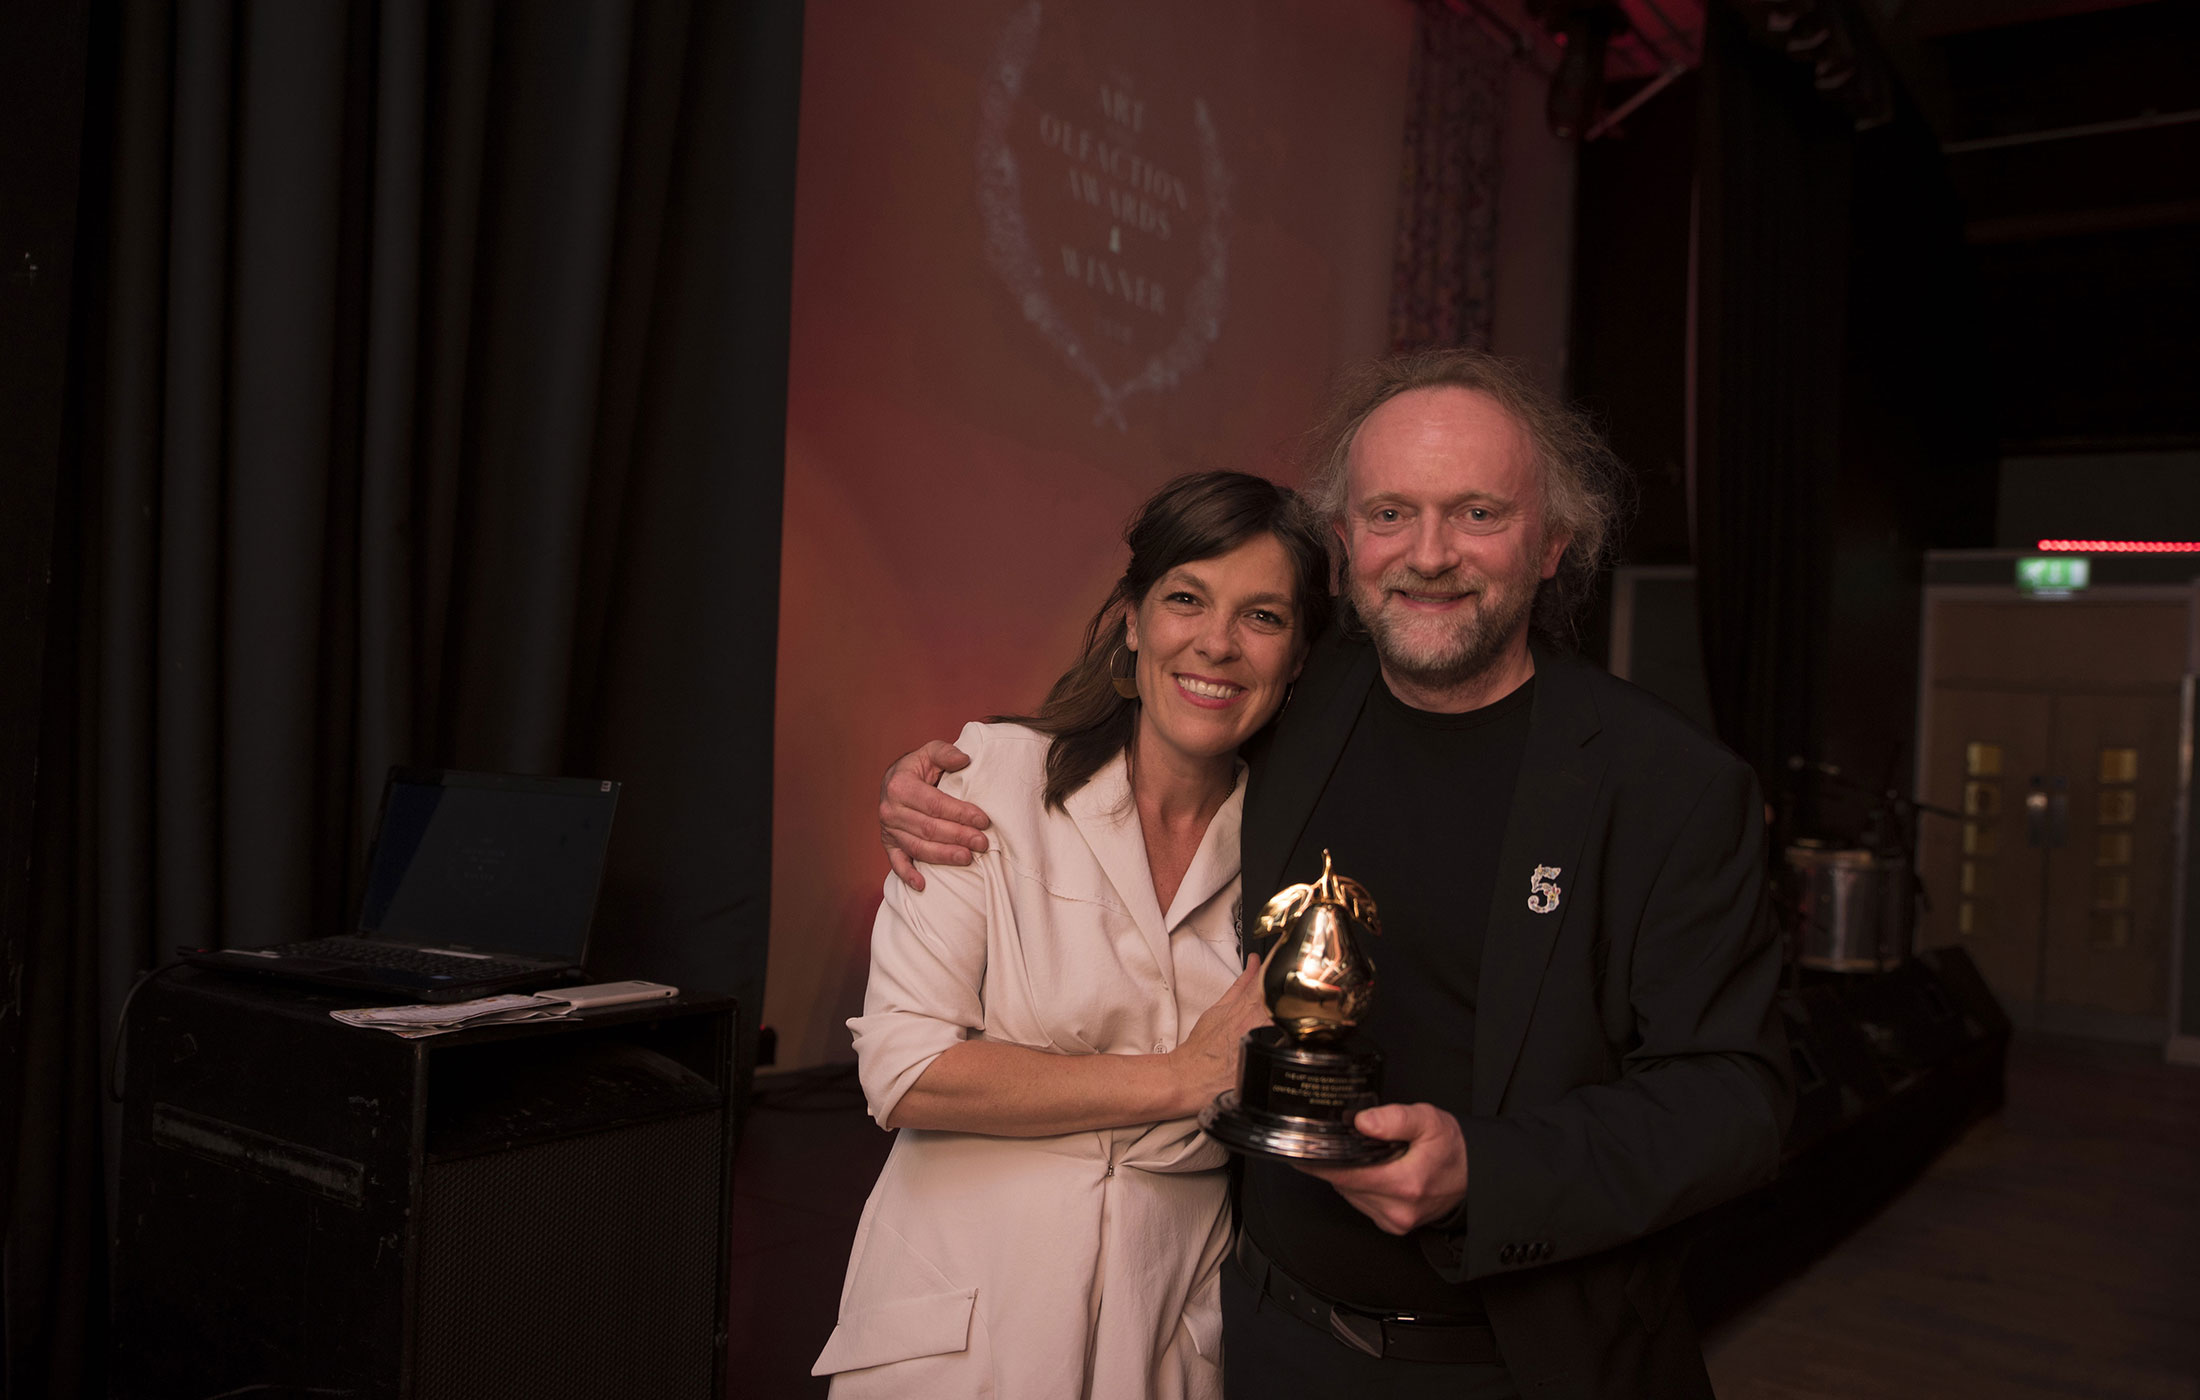 Saskia Wilson-Brown and Peter de Cuper at the Art and Olfaction Awards, Photo by Marina Chichi